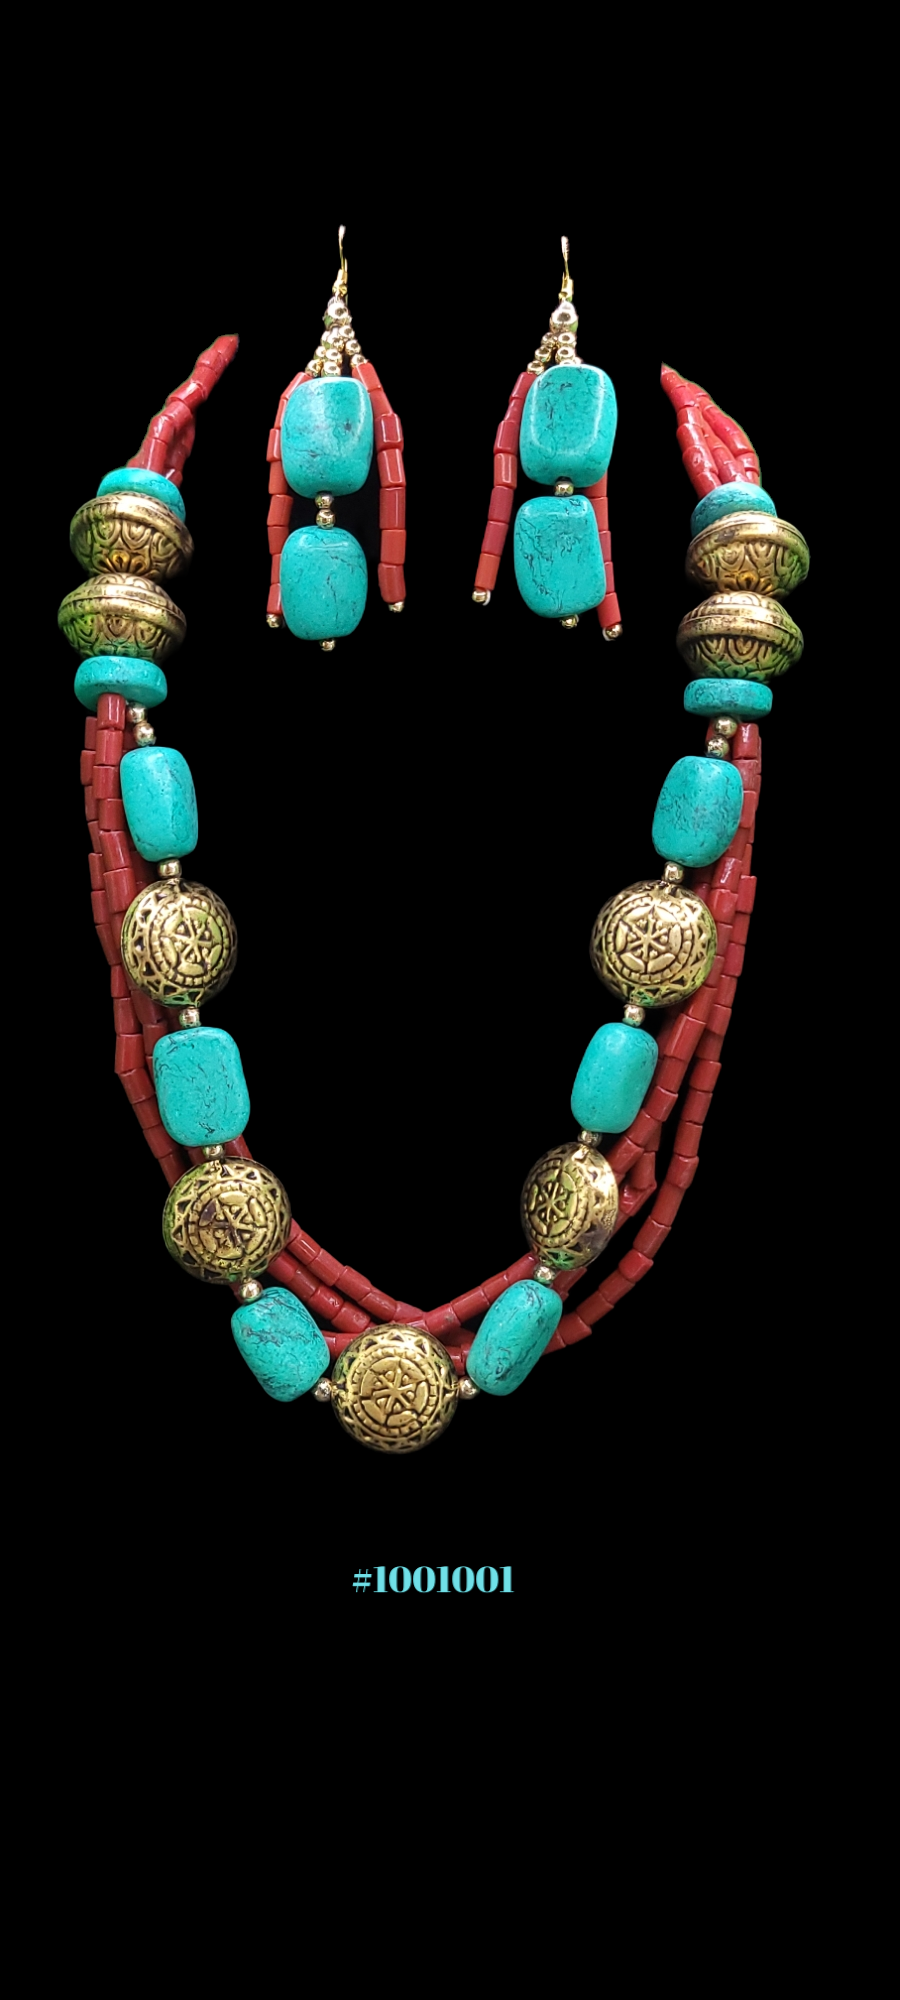 COLORFUL TIBERIAN NECKLACE SET WITH EARRINGS